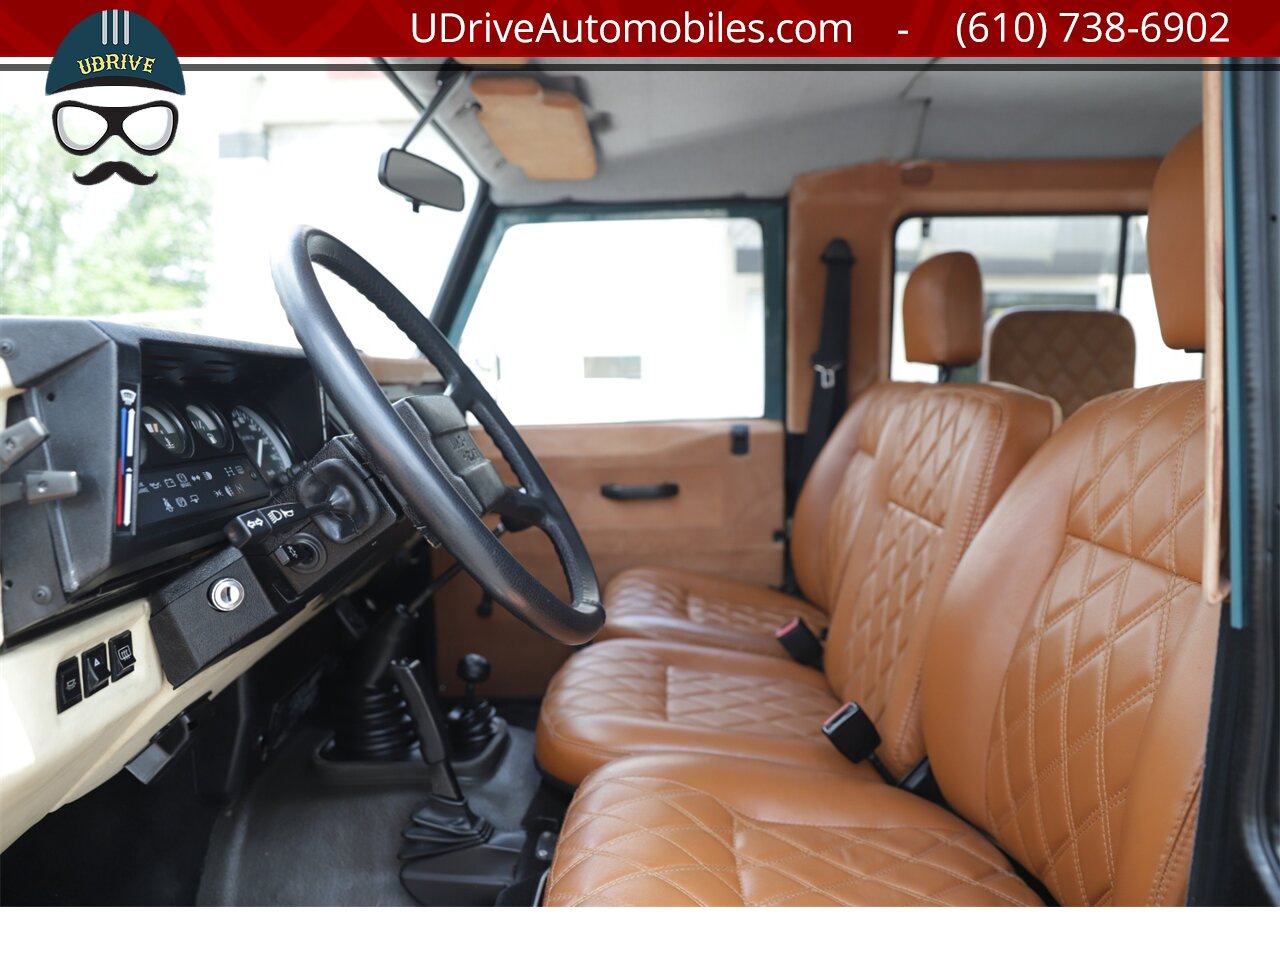 1986 Land Rover Defender 90 D90 4.0L V8 5 Speed Manual New Interior  $25k Recent Engine Build - Photo 31 - West Chester, PA 19382